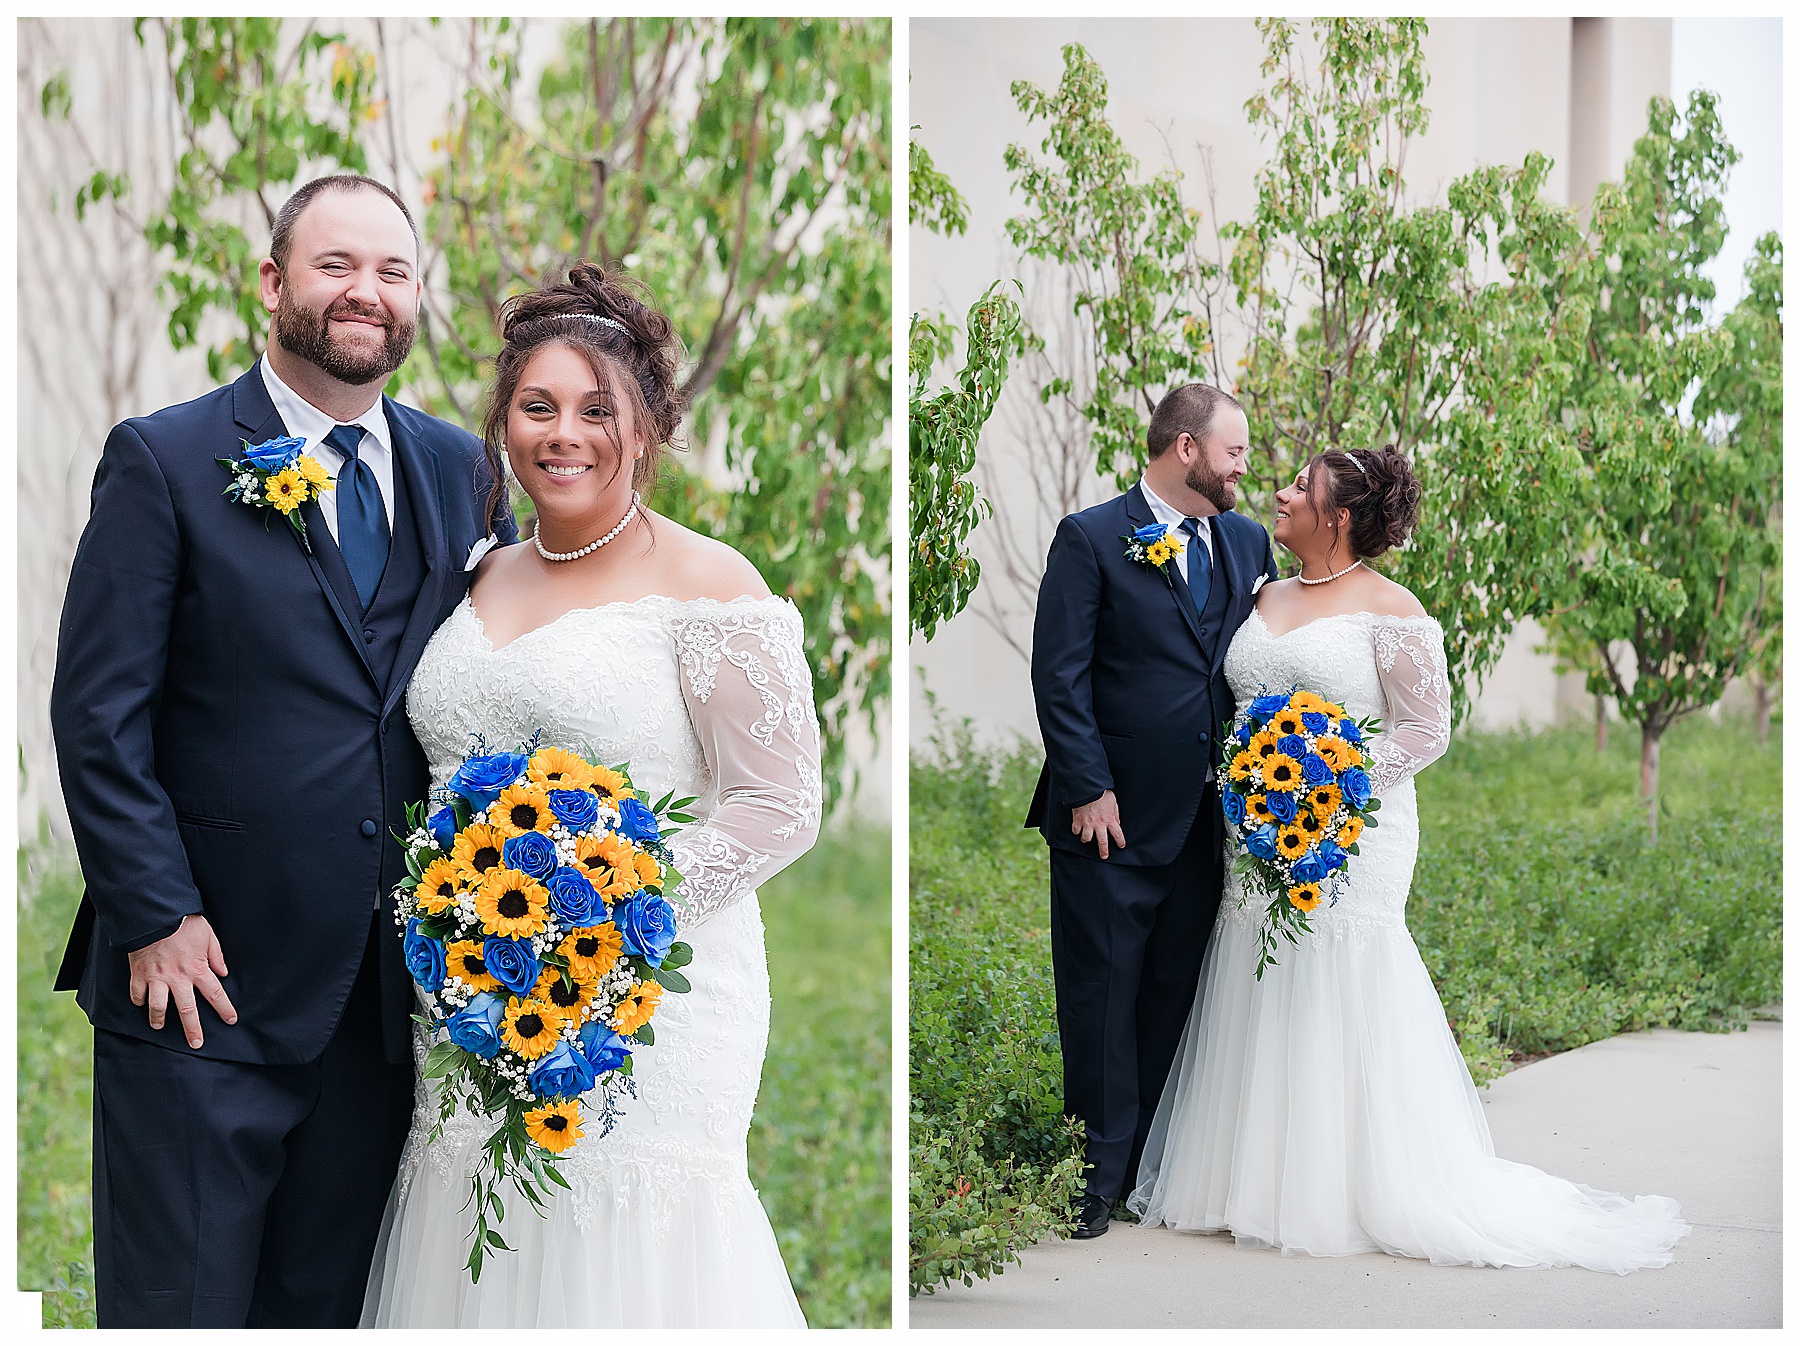 Bride with blue and gold bouquet stand with groom outside the Bismarck Heritage Center